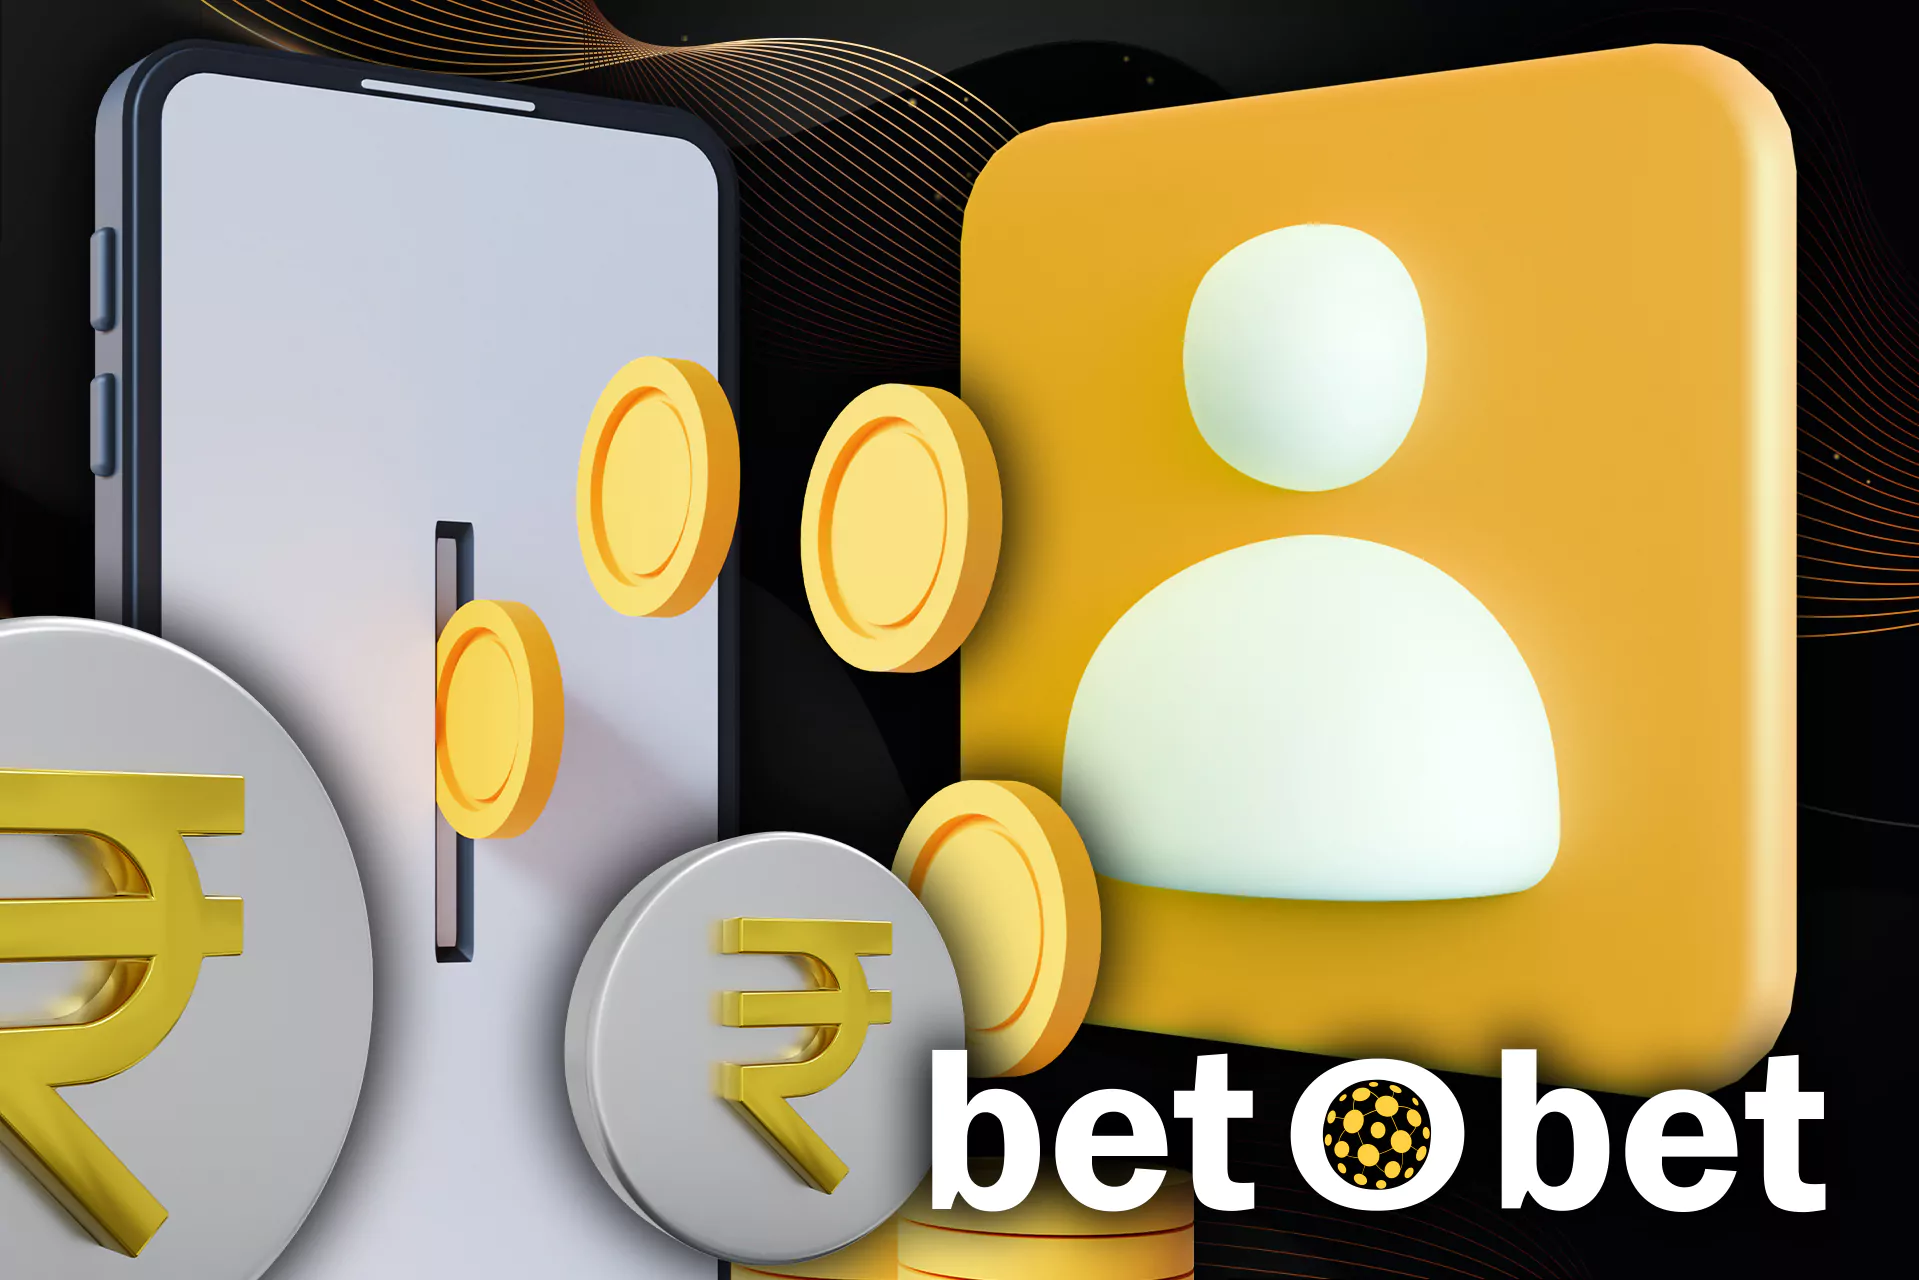 Meet all the requirements to withdraw your winnings with no problems.